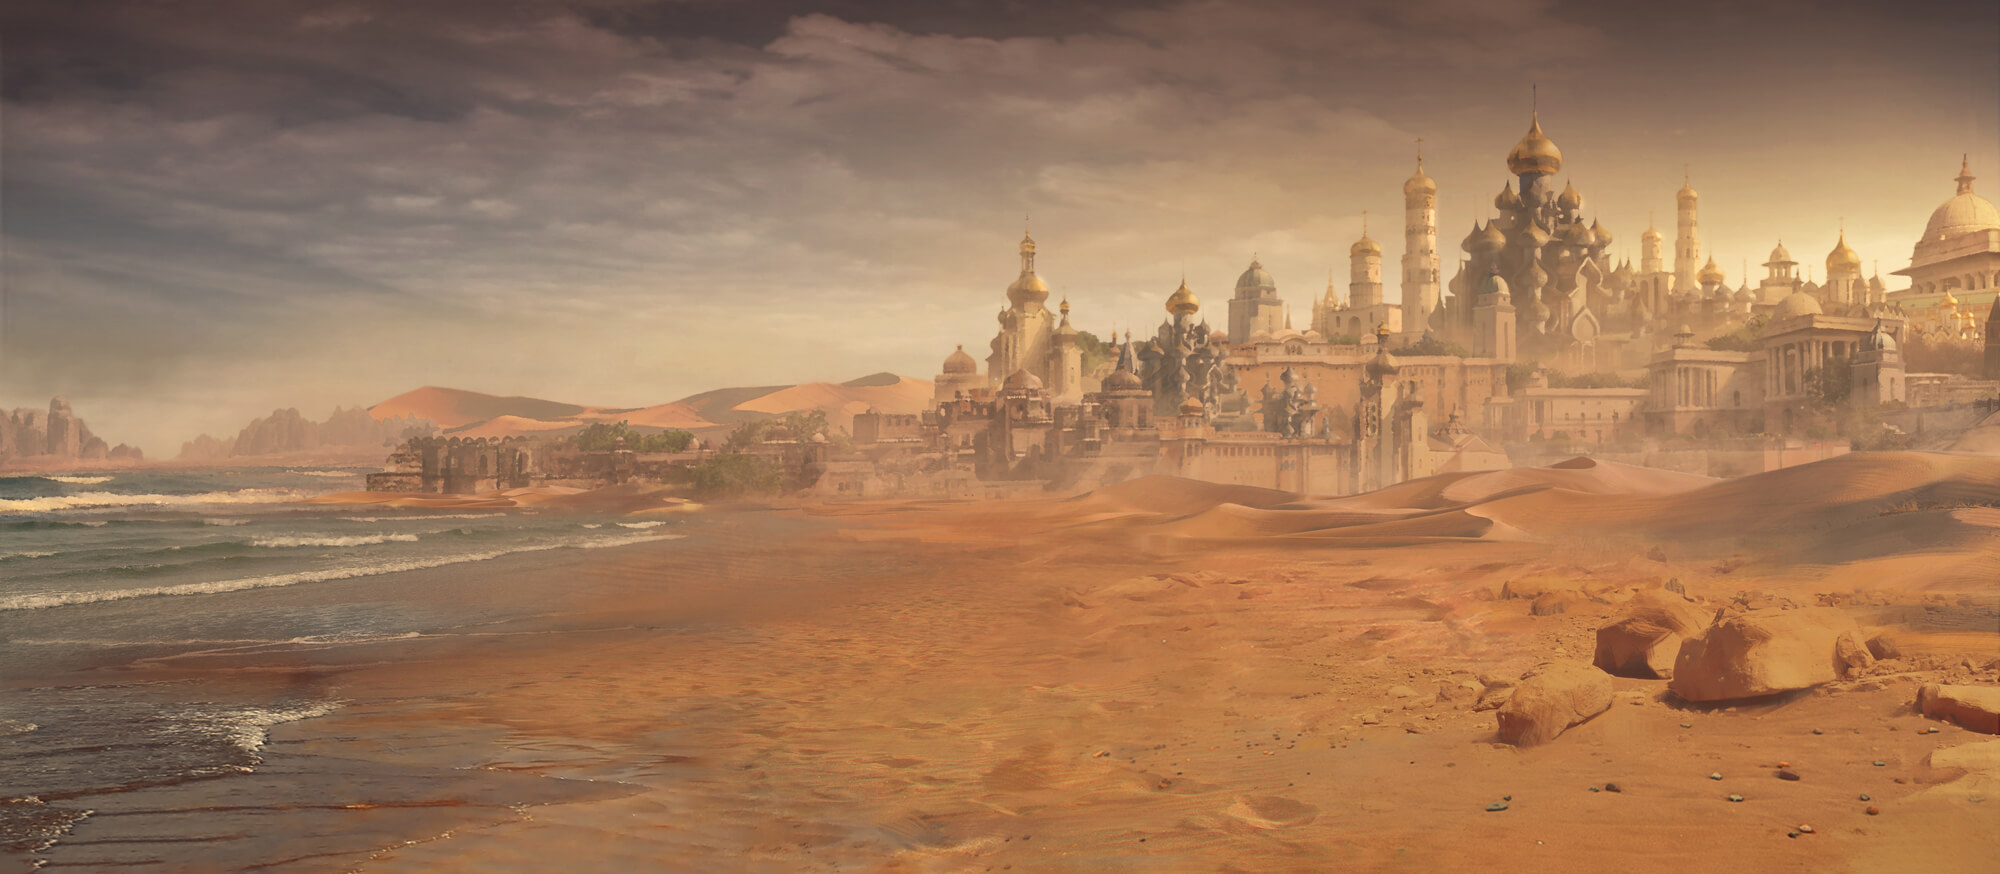 Kynazarr background slides into view behind the king. Middle-eastern fantasy city in a desert at the edge of the sea.